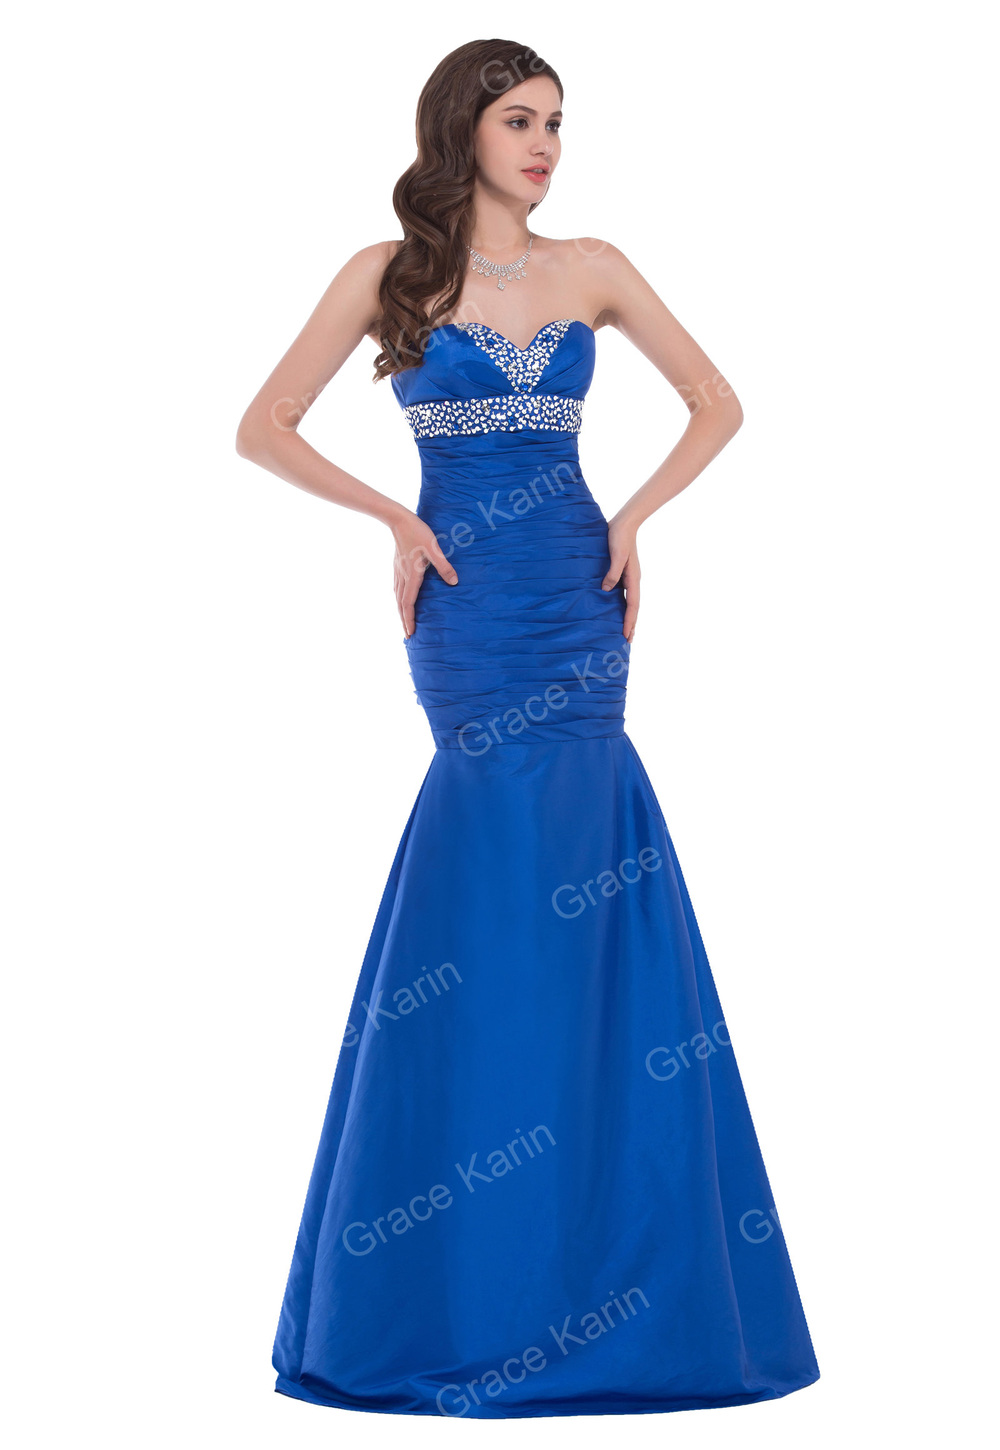 GK-2015-Women-s-Special-Occasion-Royal.jpg